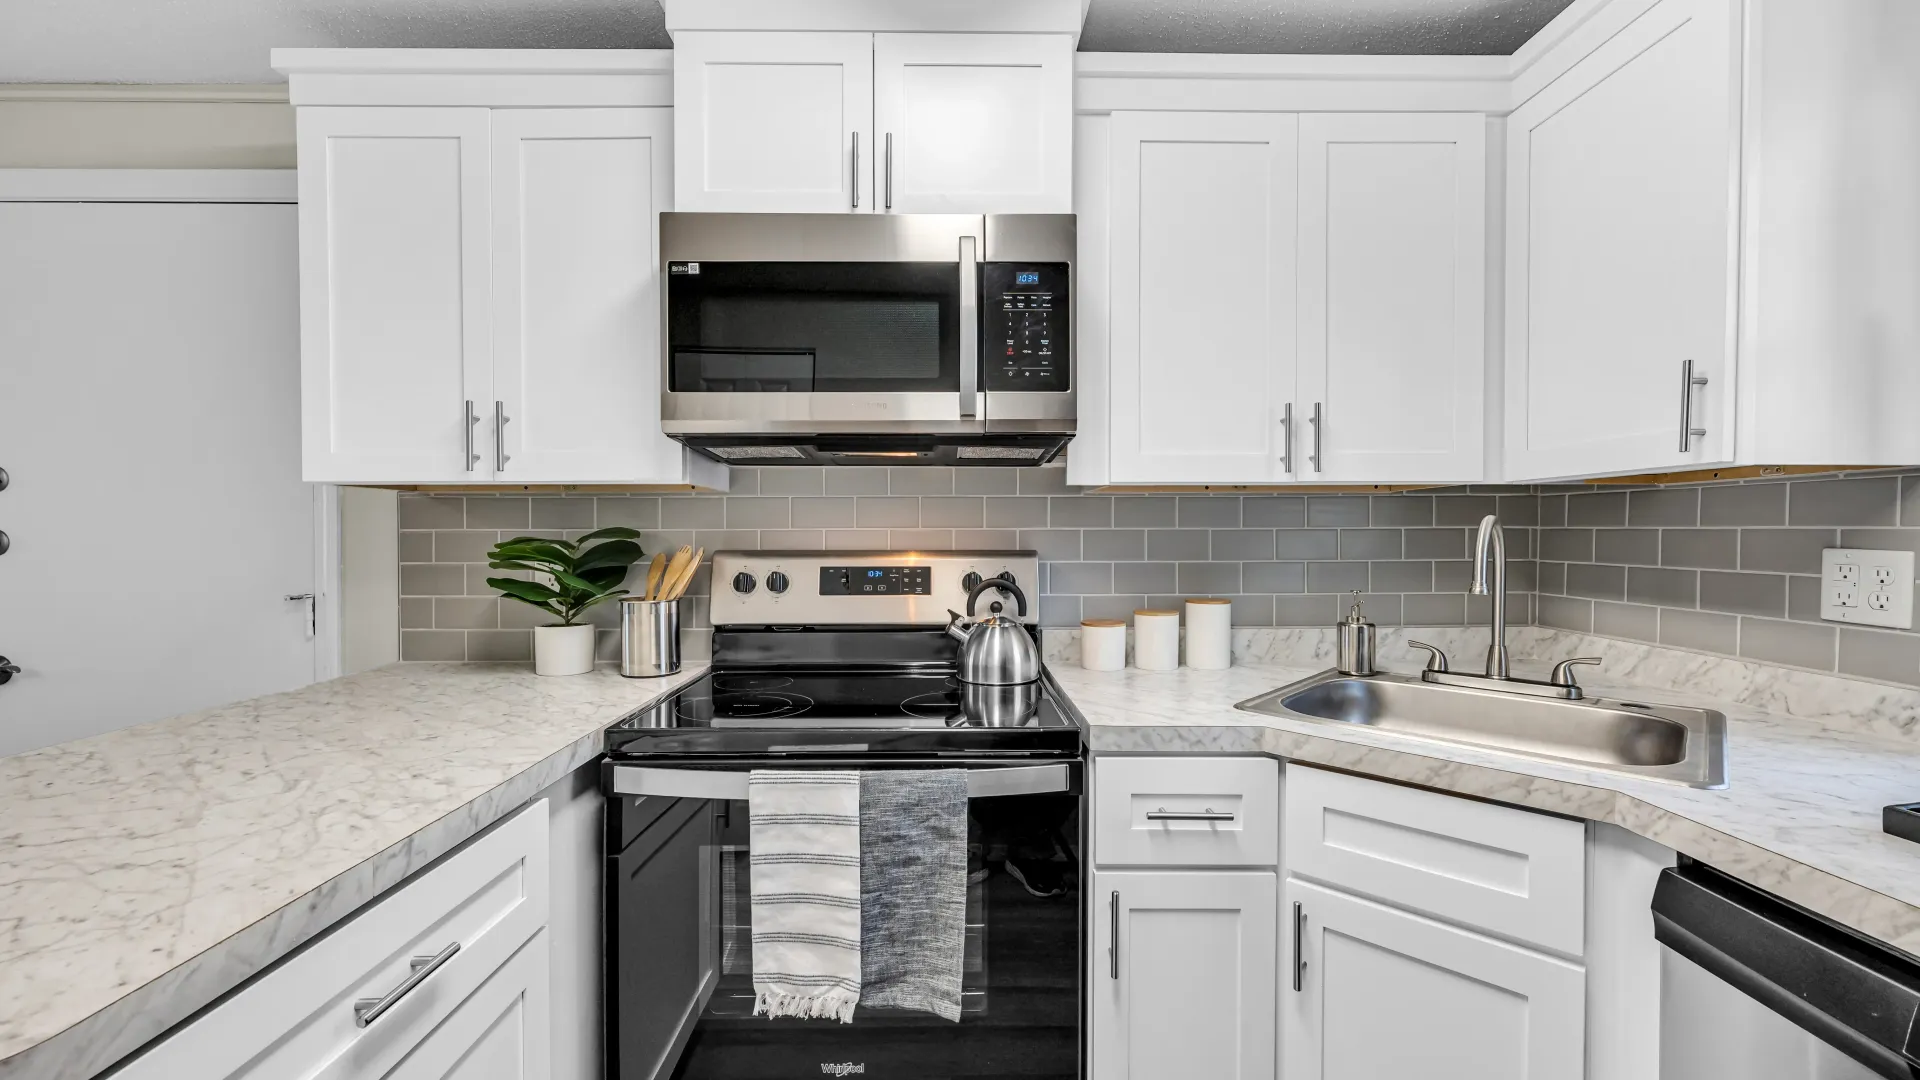 Kitchen outfitted with sleek stainless-steel appliances with a look at the stove and microwave with a slick grey backsplash. 